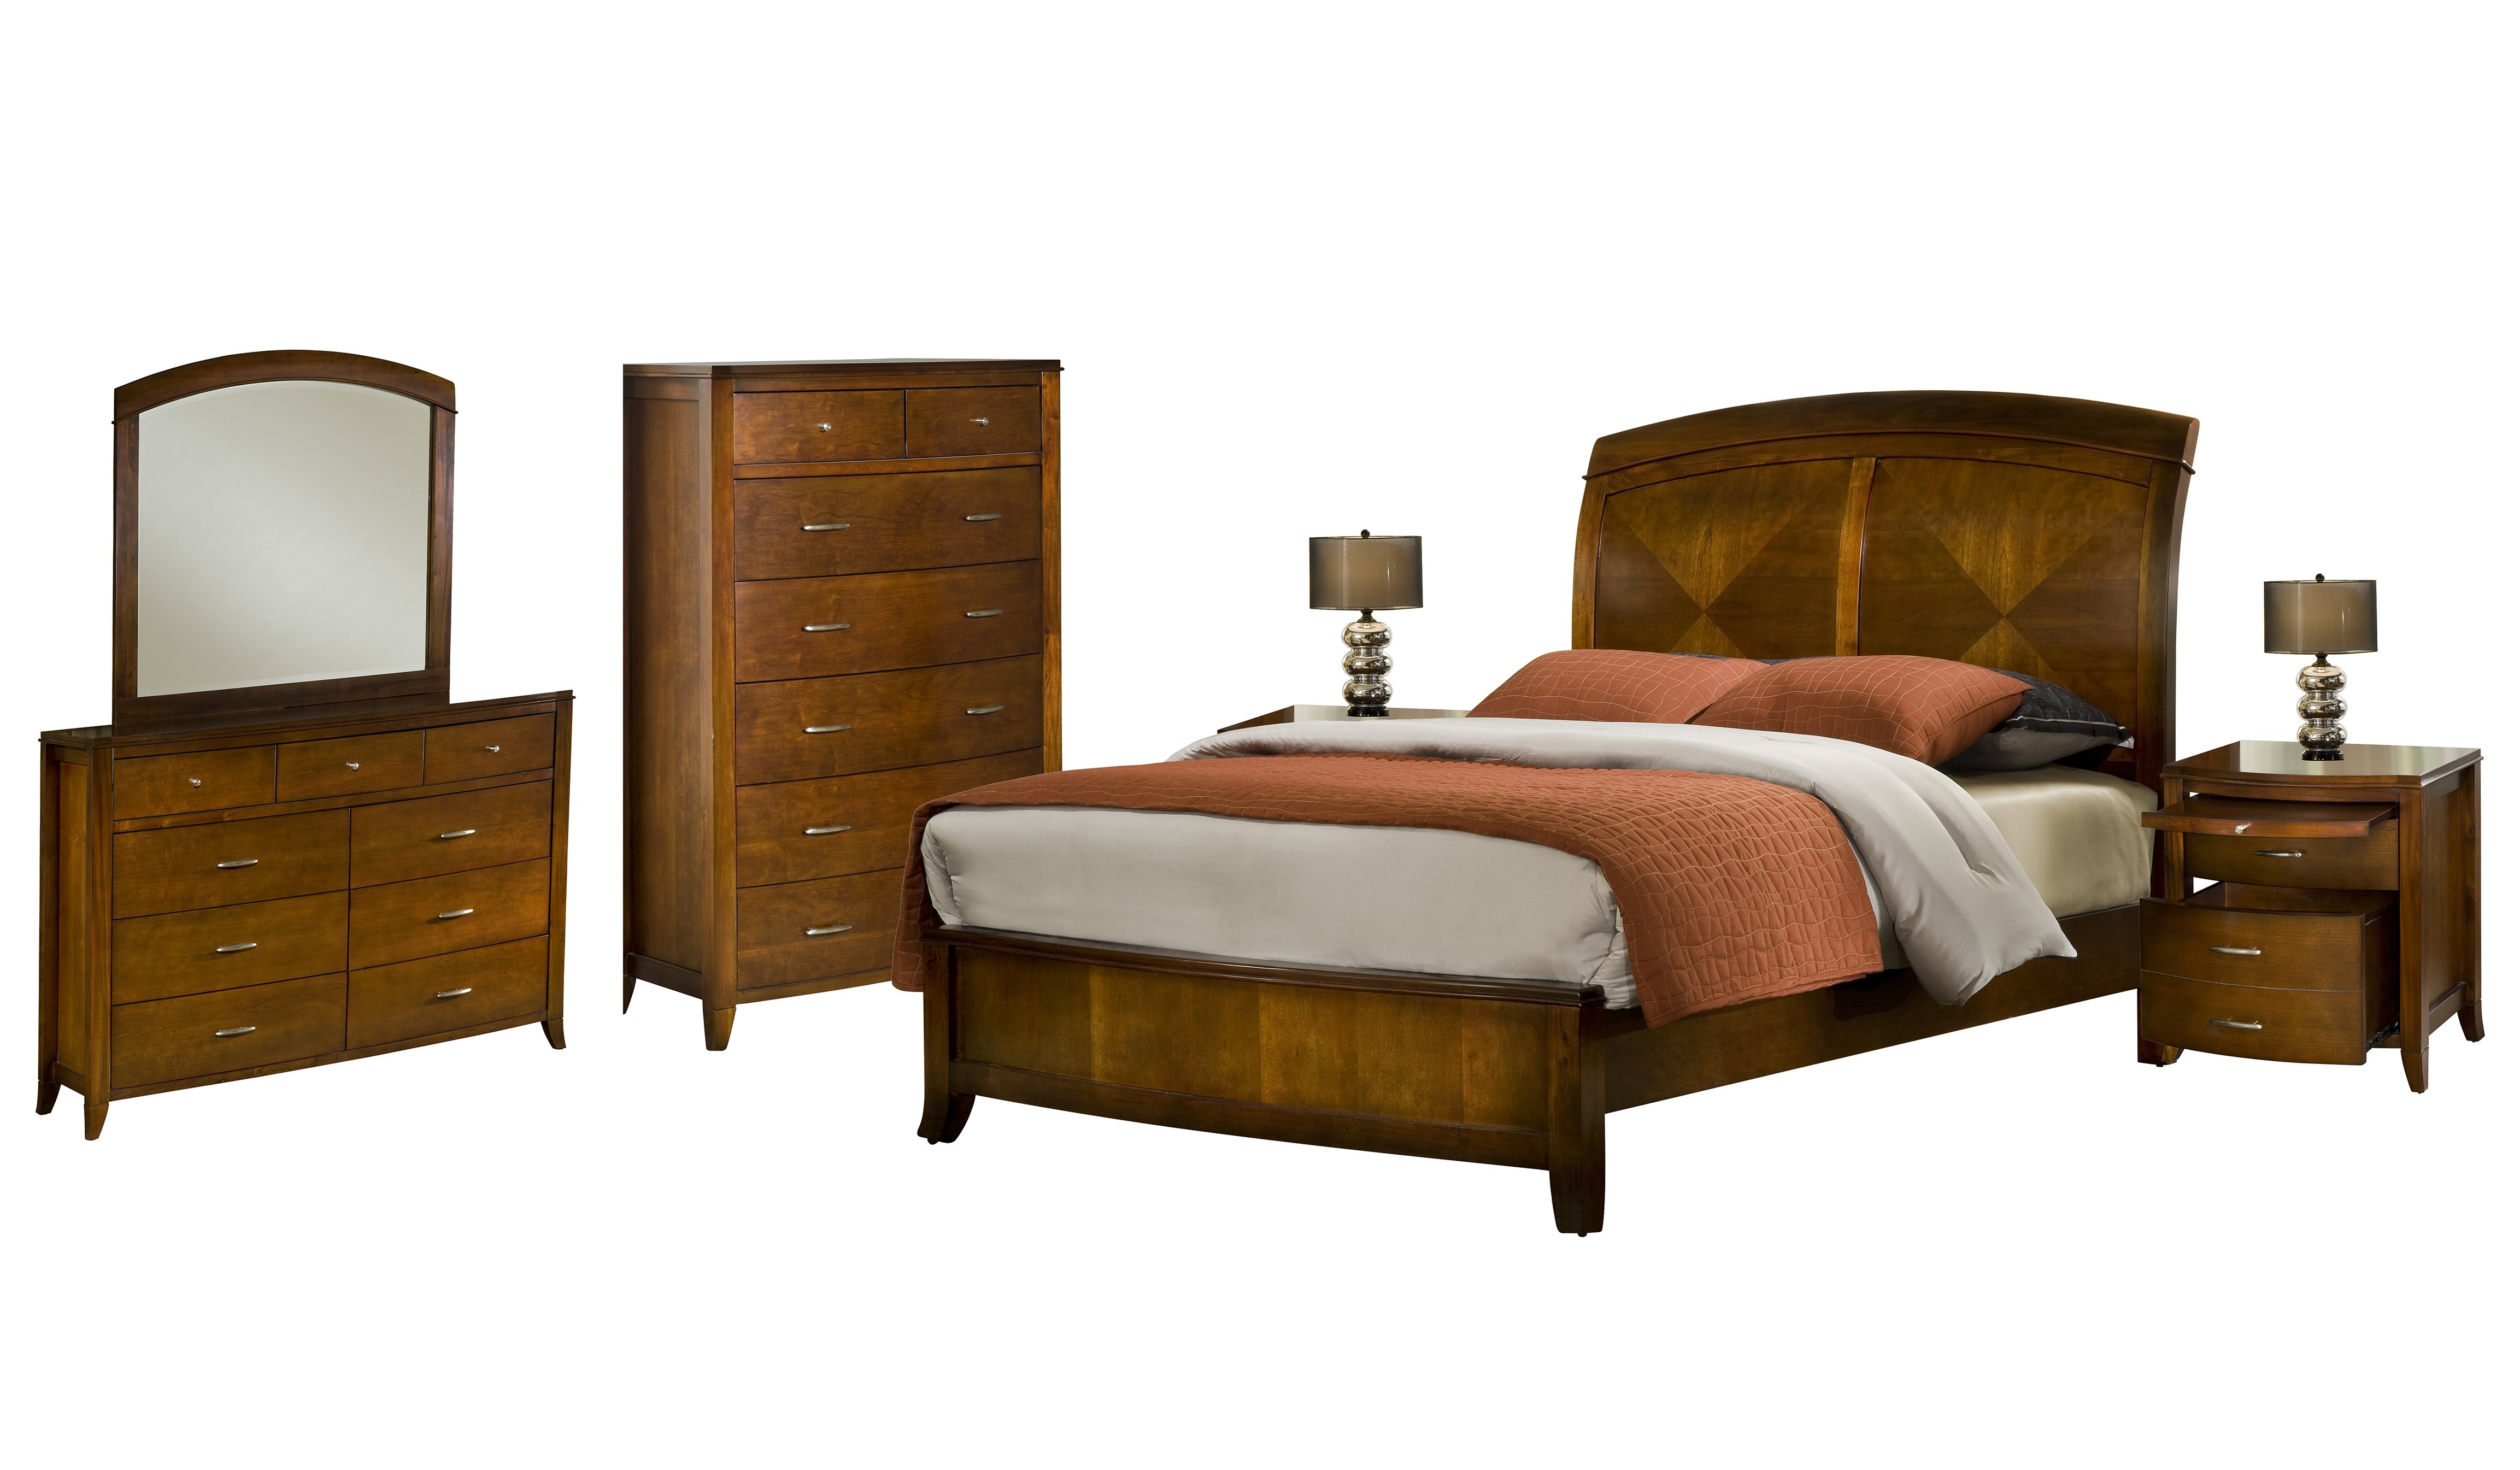 Viven 6PC E King Bed, 2 Nightstand, Dresser, Mirror & Chest Set in Mahogany Spice - image 1 of 6